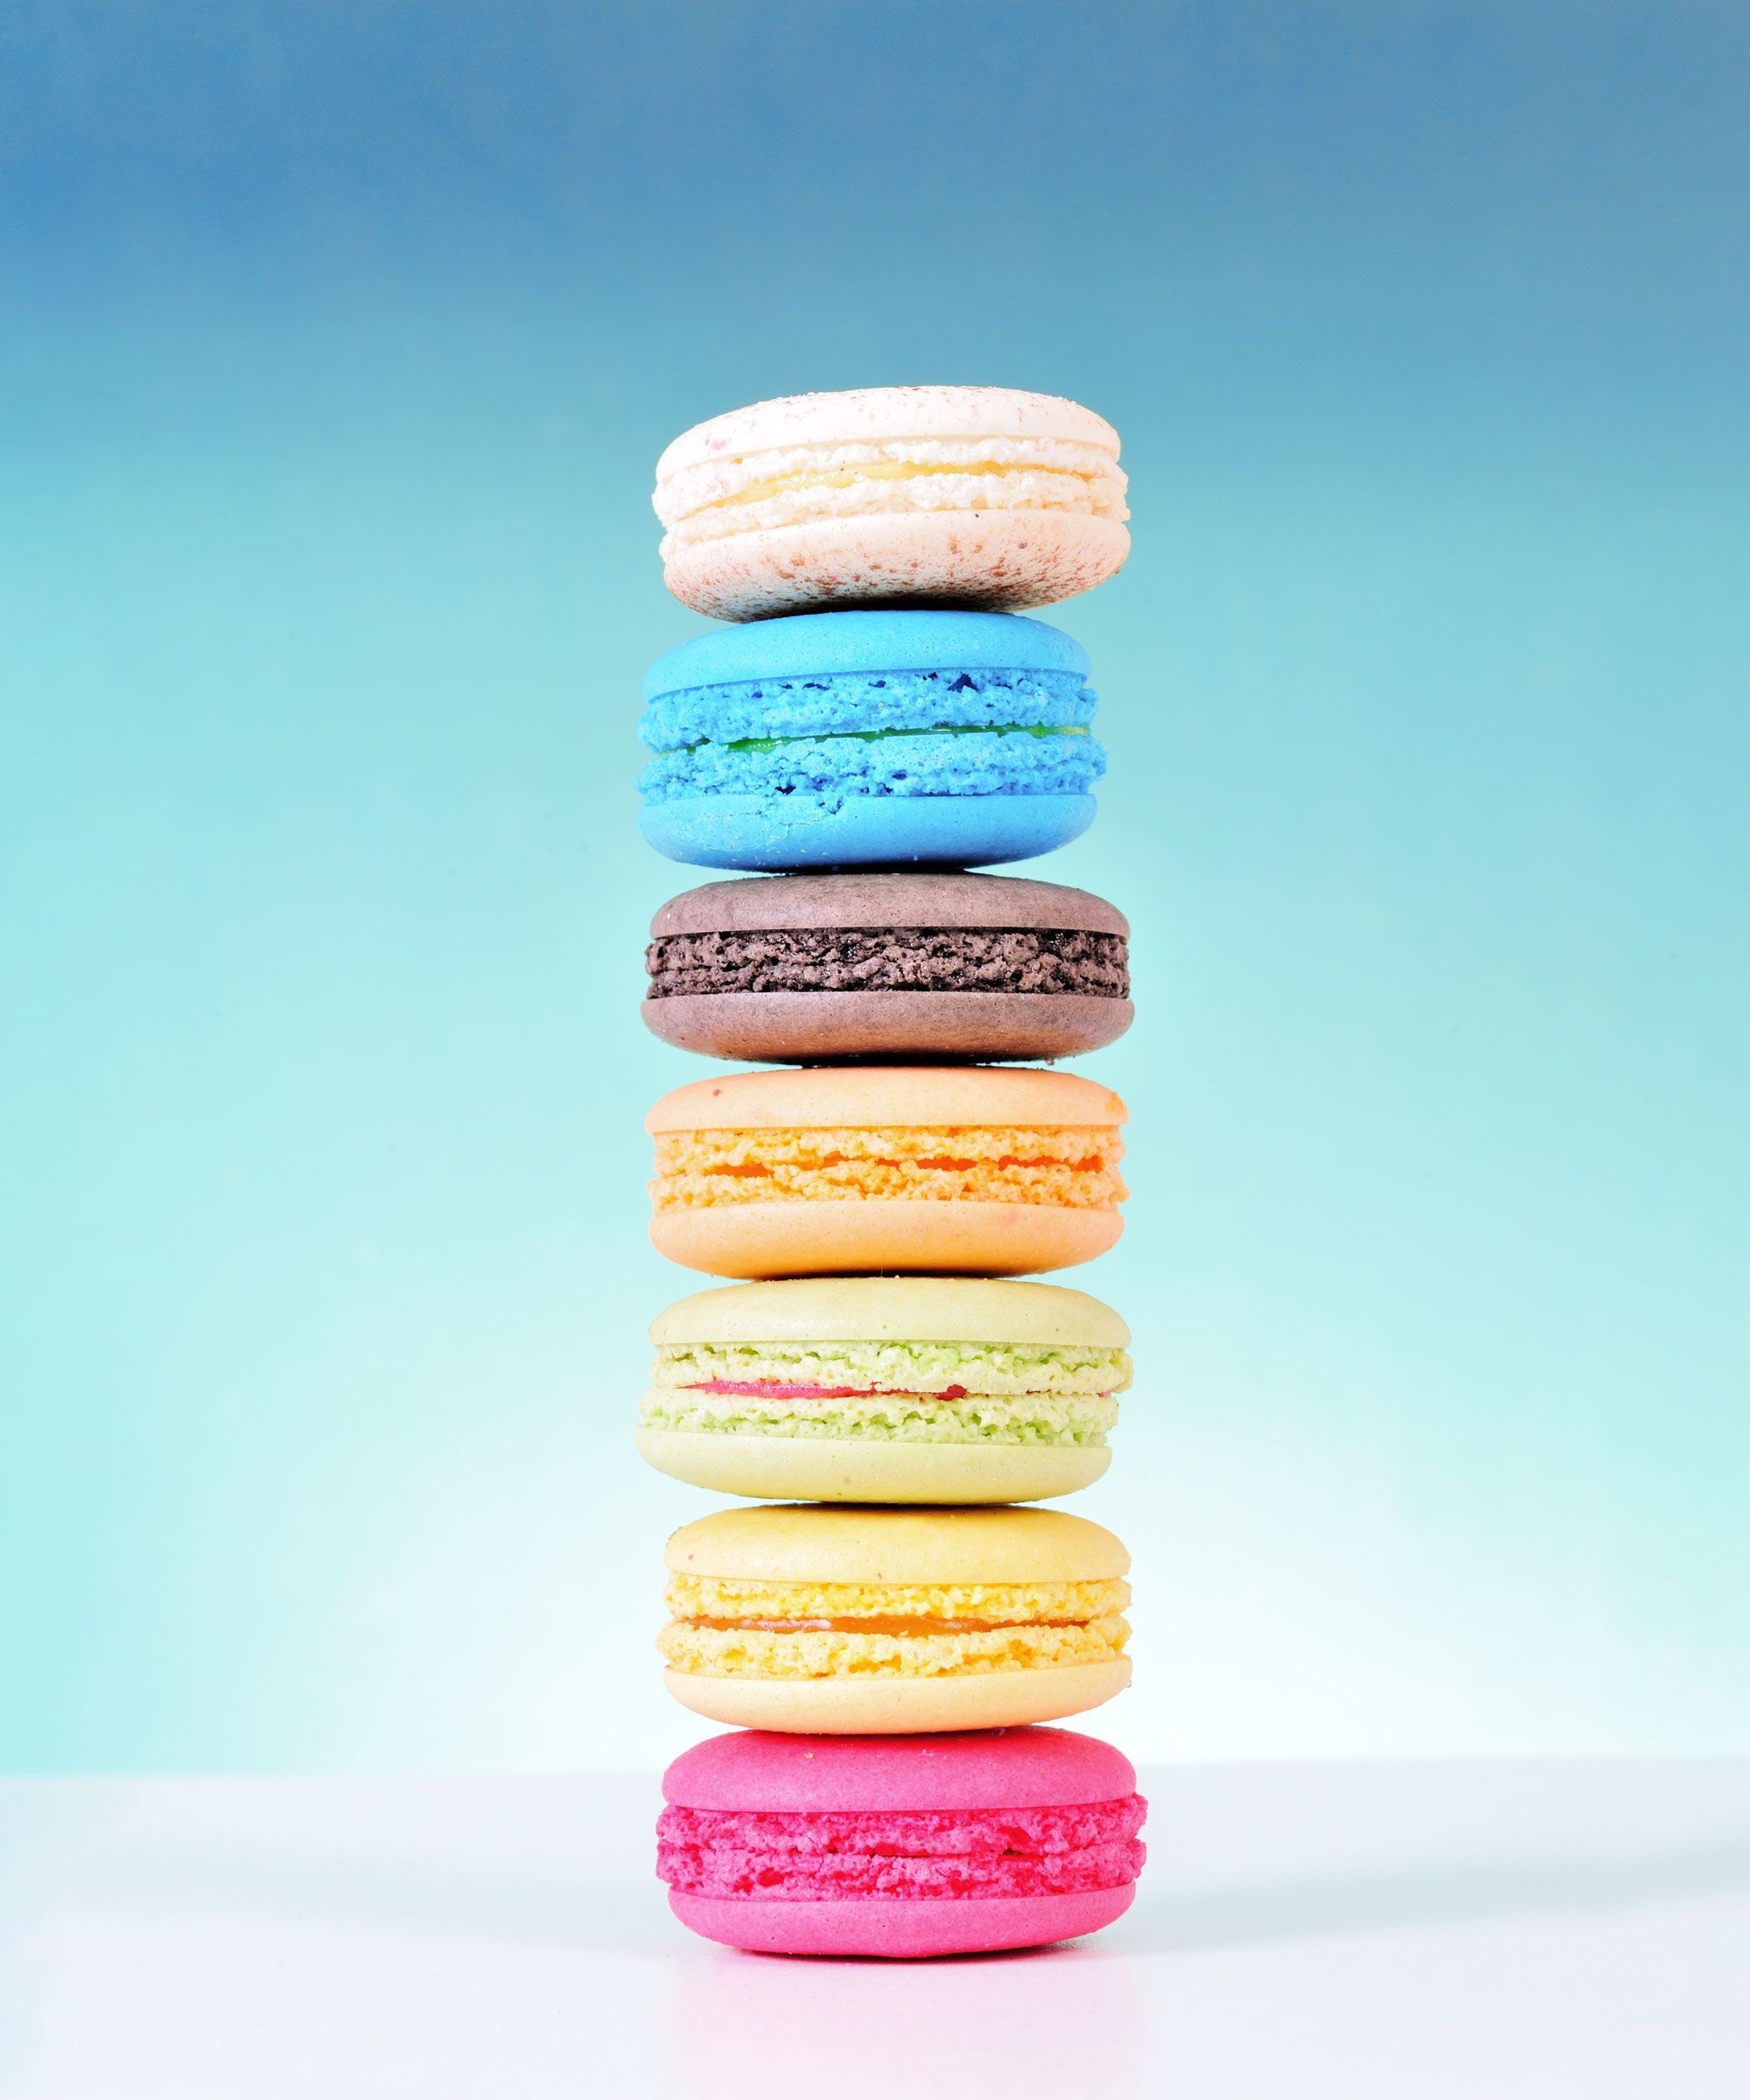 Macaron: Macarons, date back to the Middle Ages in Europe. 2000x2400 HD Wallpaper.